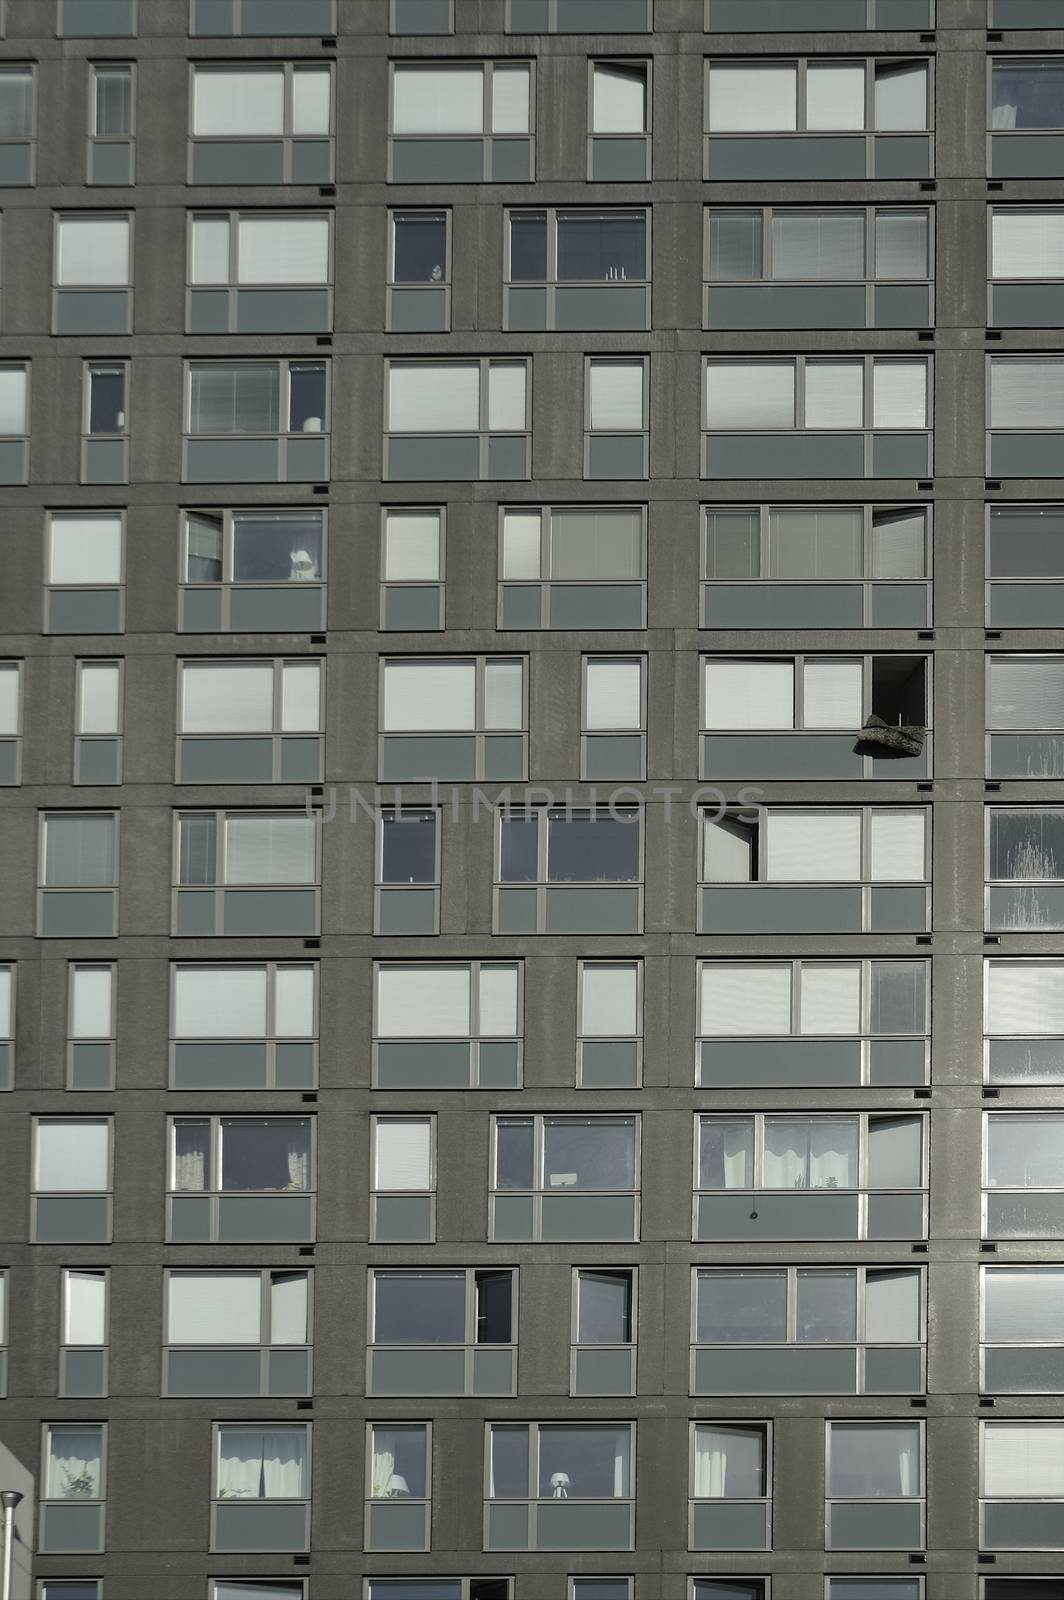 Windows and balconies by a40757